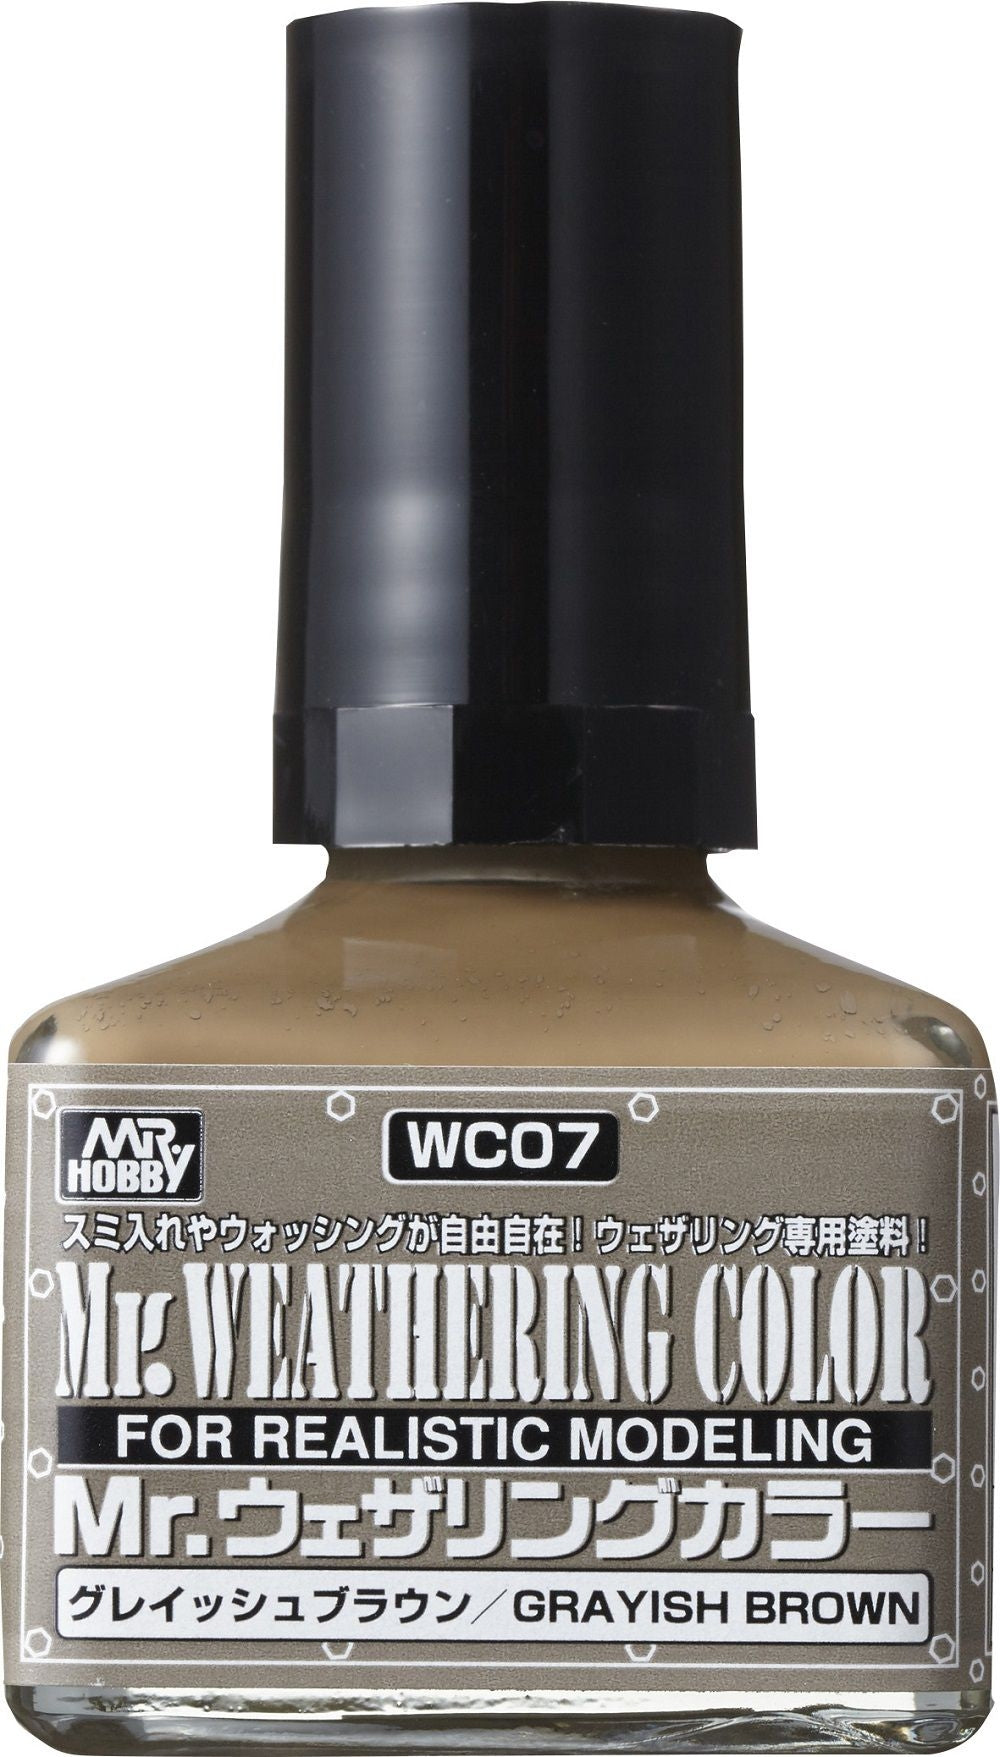 Mr Hobby Wc07 Mr Weathering Colour Grayish Brown Mr Hobby PAINT, BRUSHES & SUPPLIES